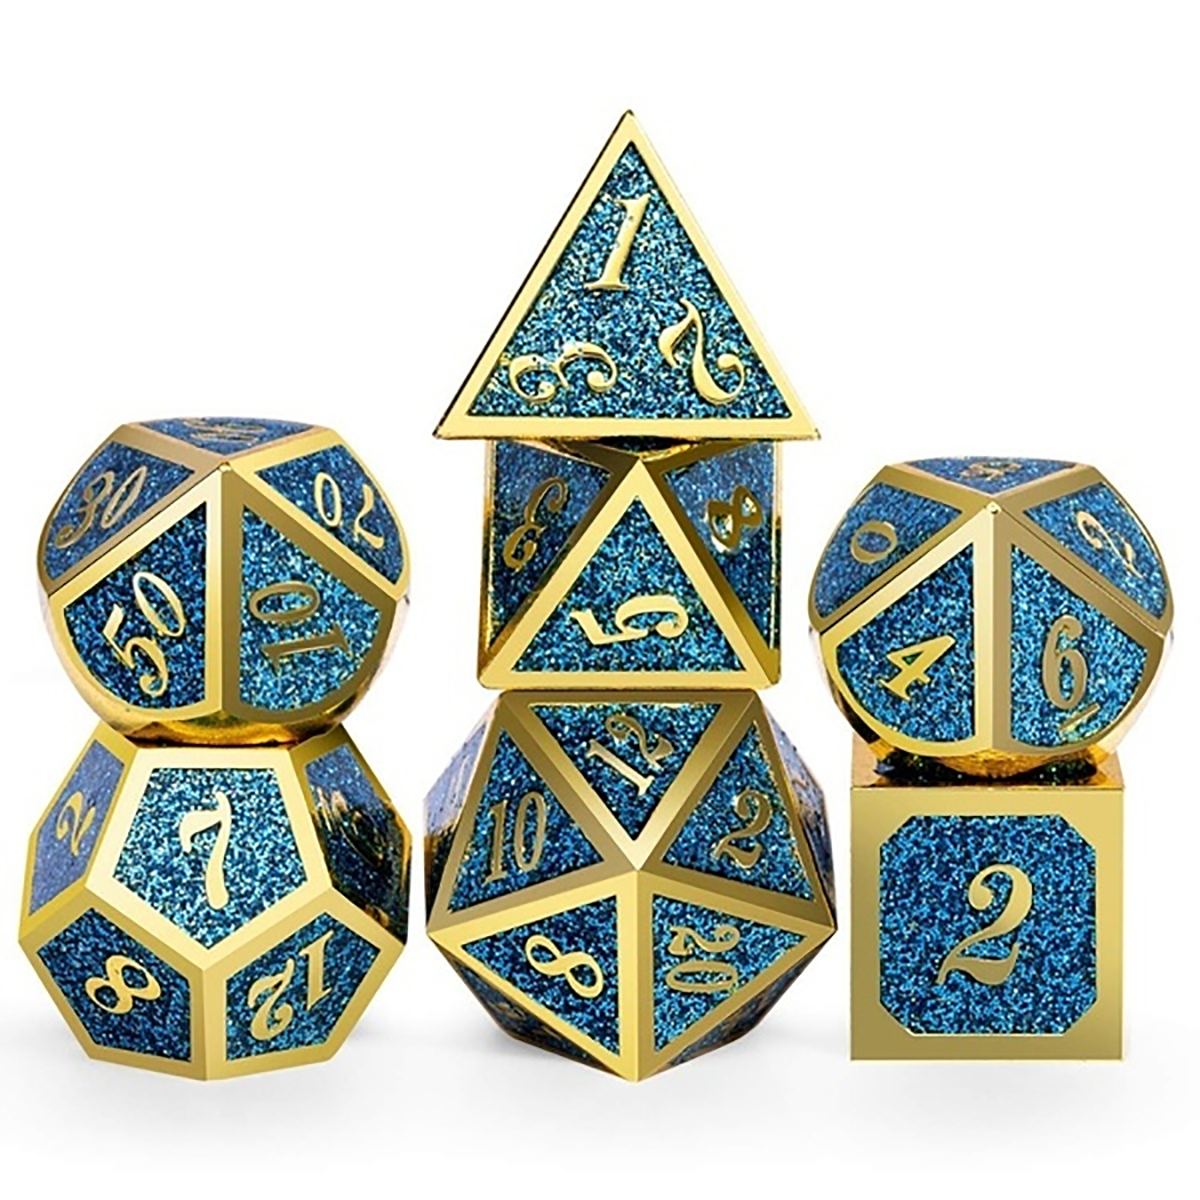 7-PcsSet-Metal-Dice-Set-Role-Playing-Dragons-Table-Board-Game-Toys-With-Cloth-Bag-Bar-Party-Game-Dic-1672532